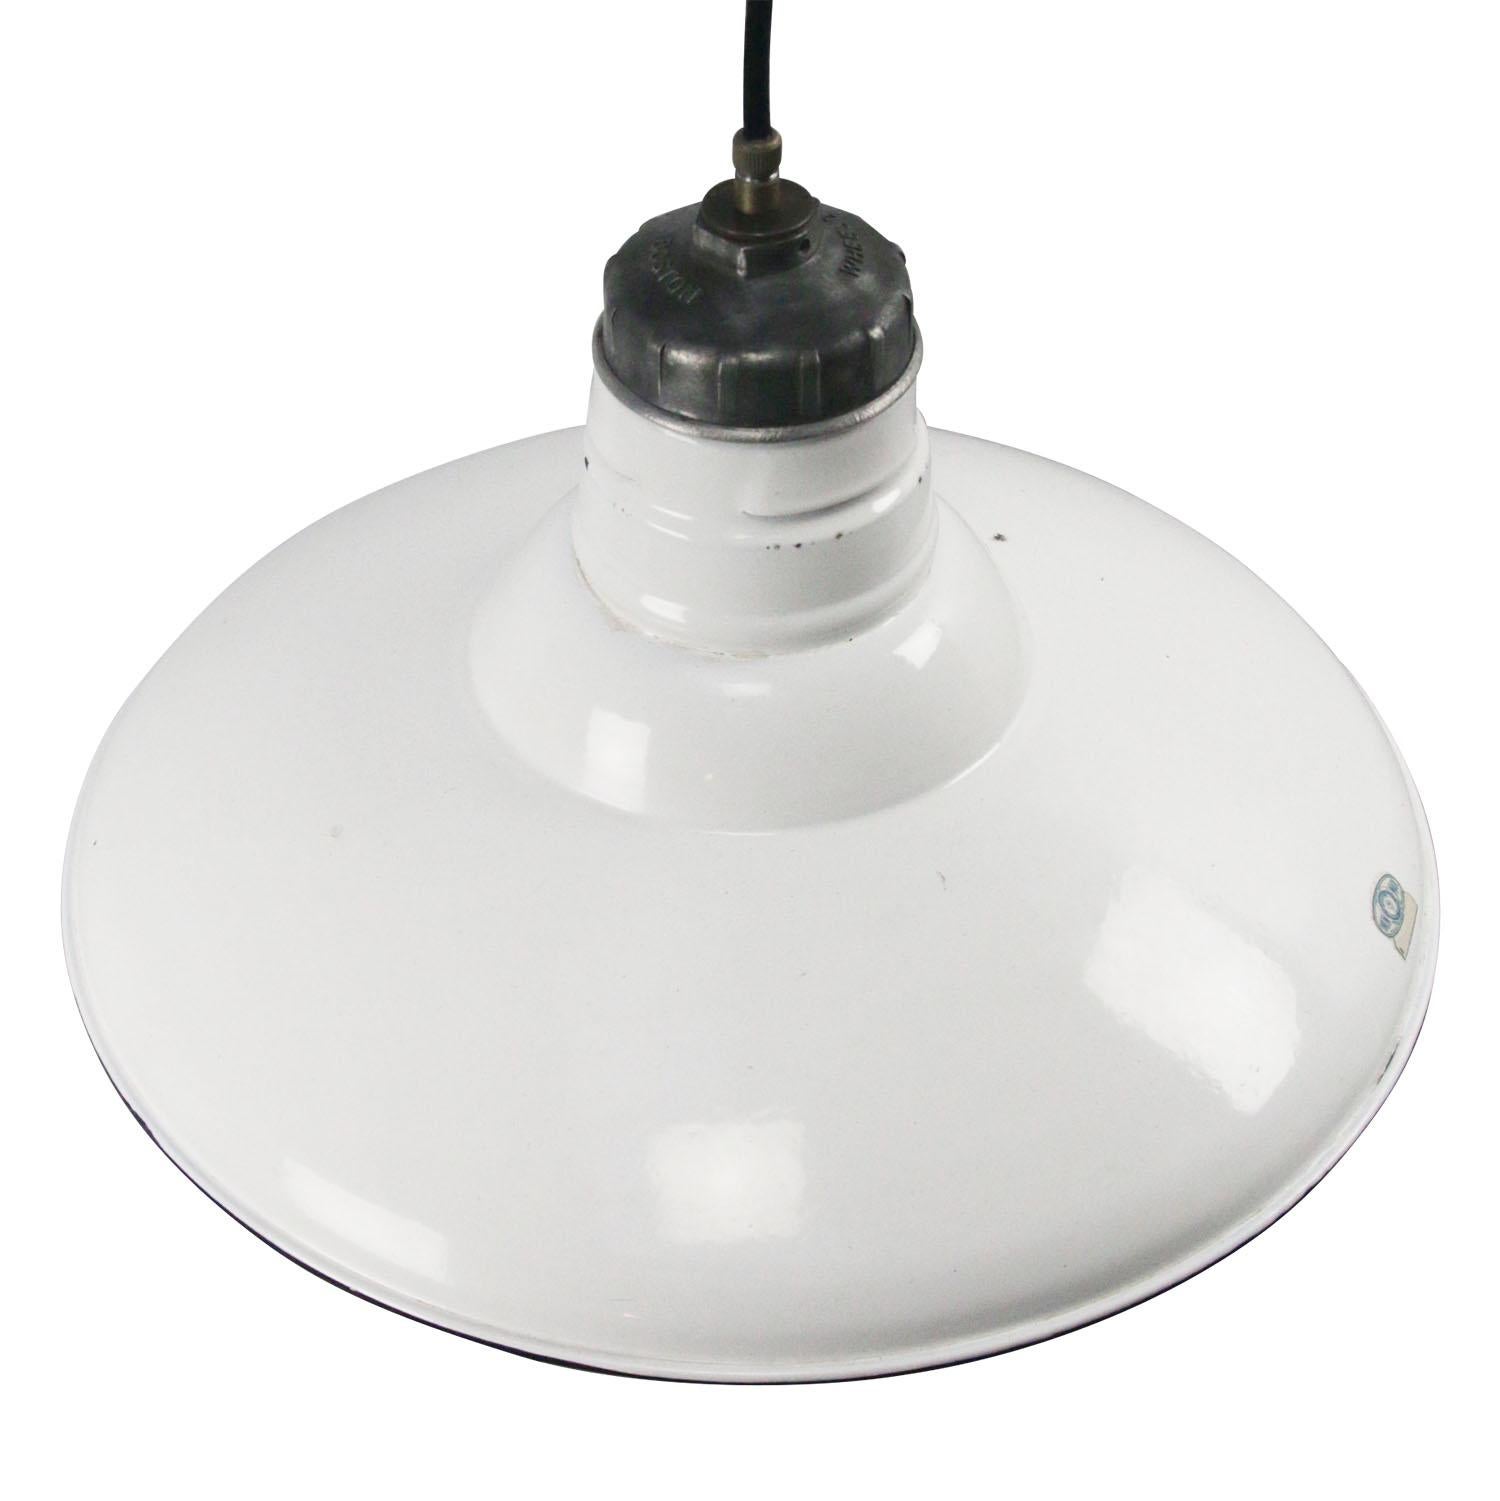 American industrial factory pendant light by Wheeler, Boston, USA.
white enamel white interior.
Metal top

Weight 1.50 kg / 3.3 lb

Priced per individual item. All lamps have been made suitable by international standards for incandescent light